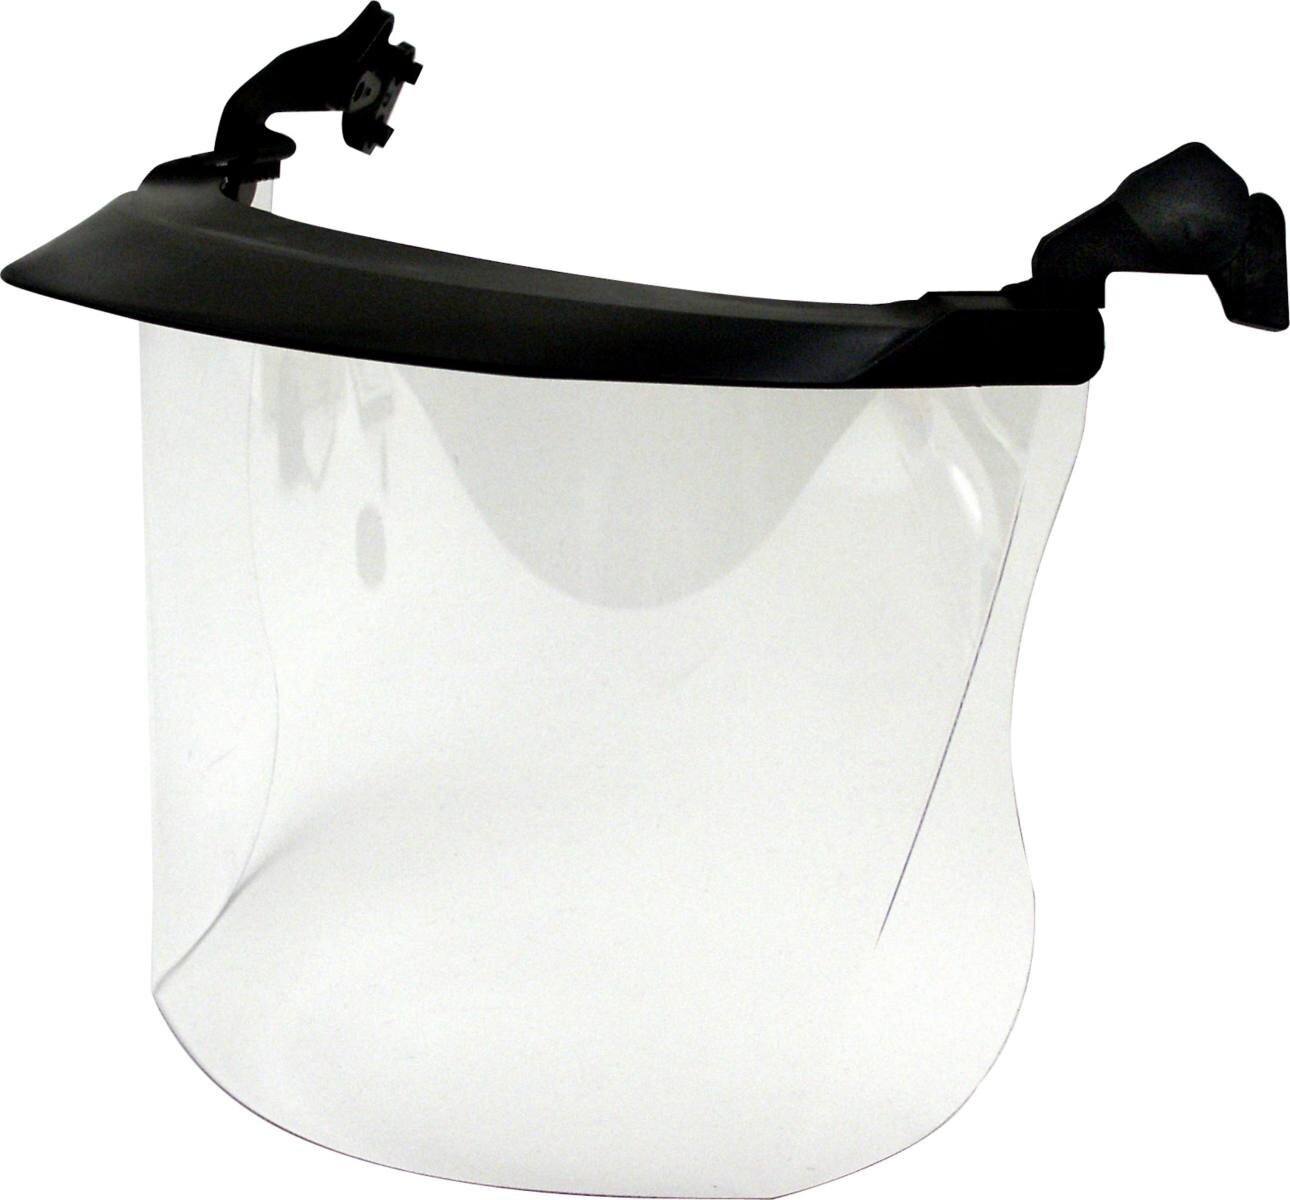 3M V4F clear visor polycarbonate with sun shieldsxtremely impact and scratch resistant thickness: 1mm, weight: 110g (including helmet mount)